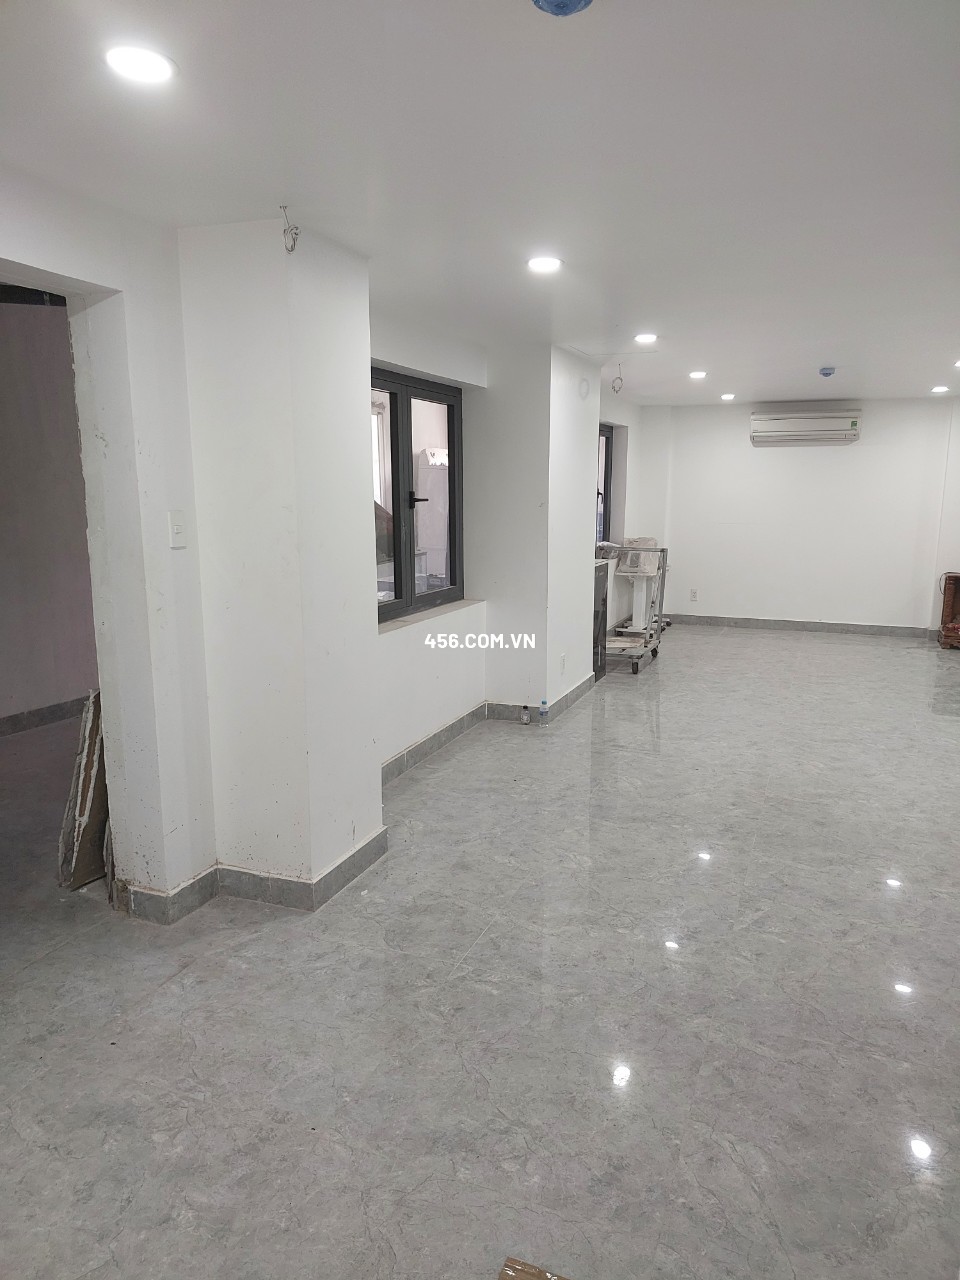 Office for rent at Xuan Thuy st Thao Dien...